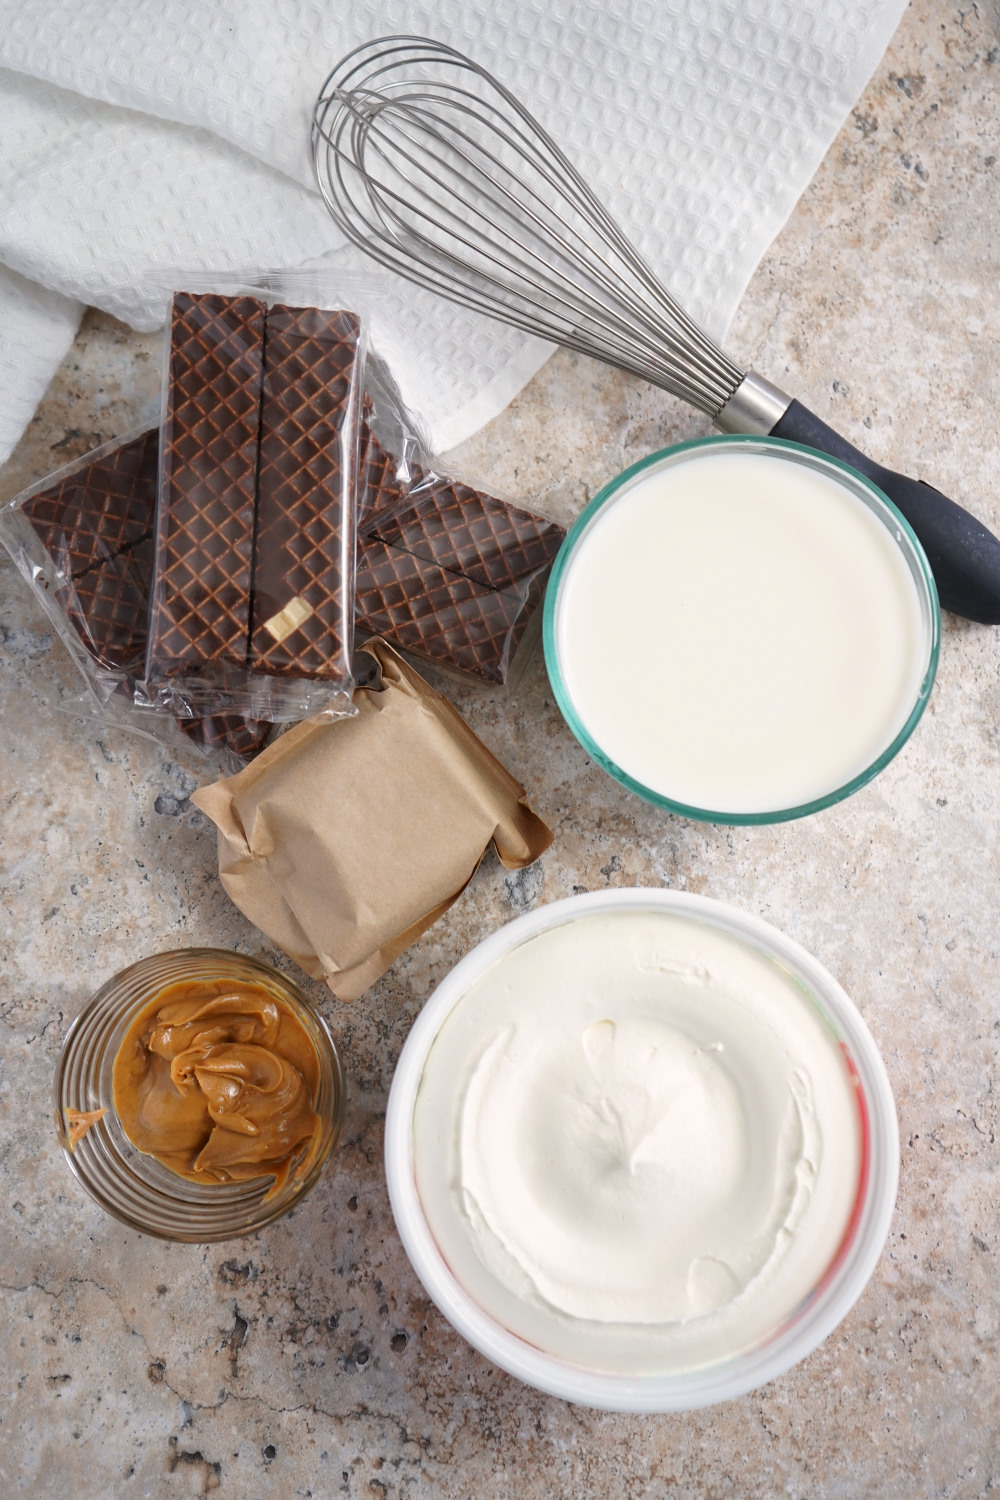 Peanut Butter and Chocolate Parfait Ingredients